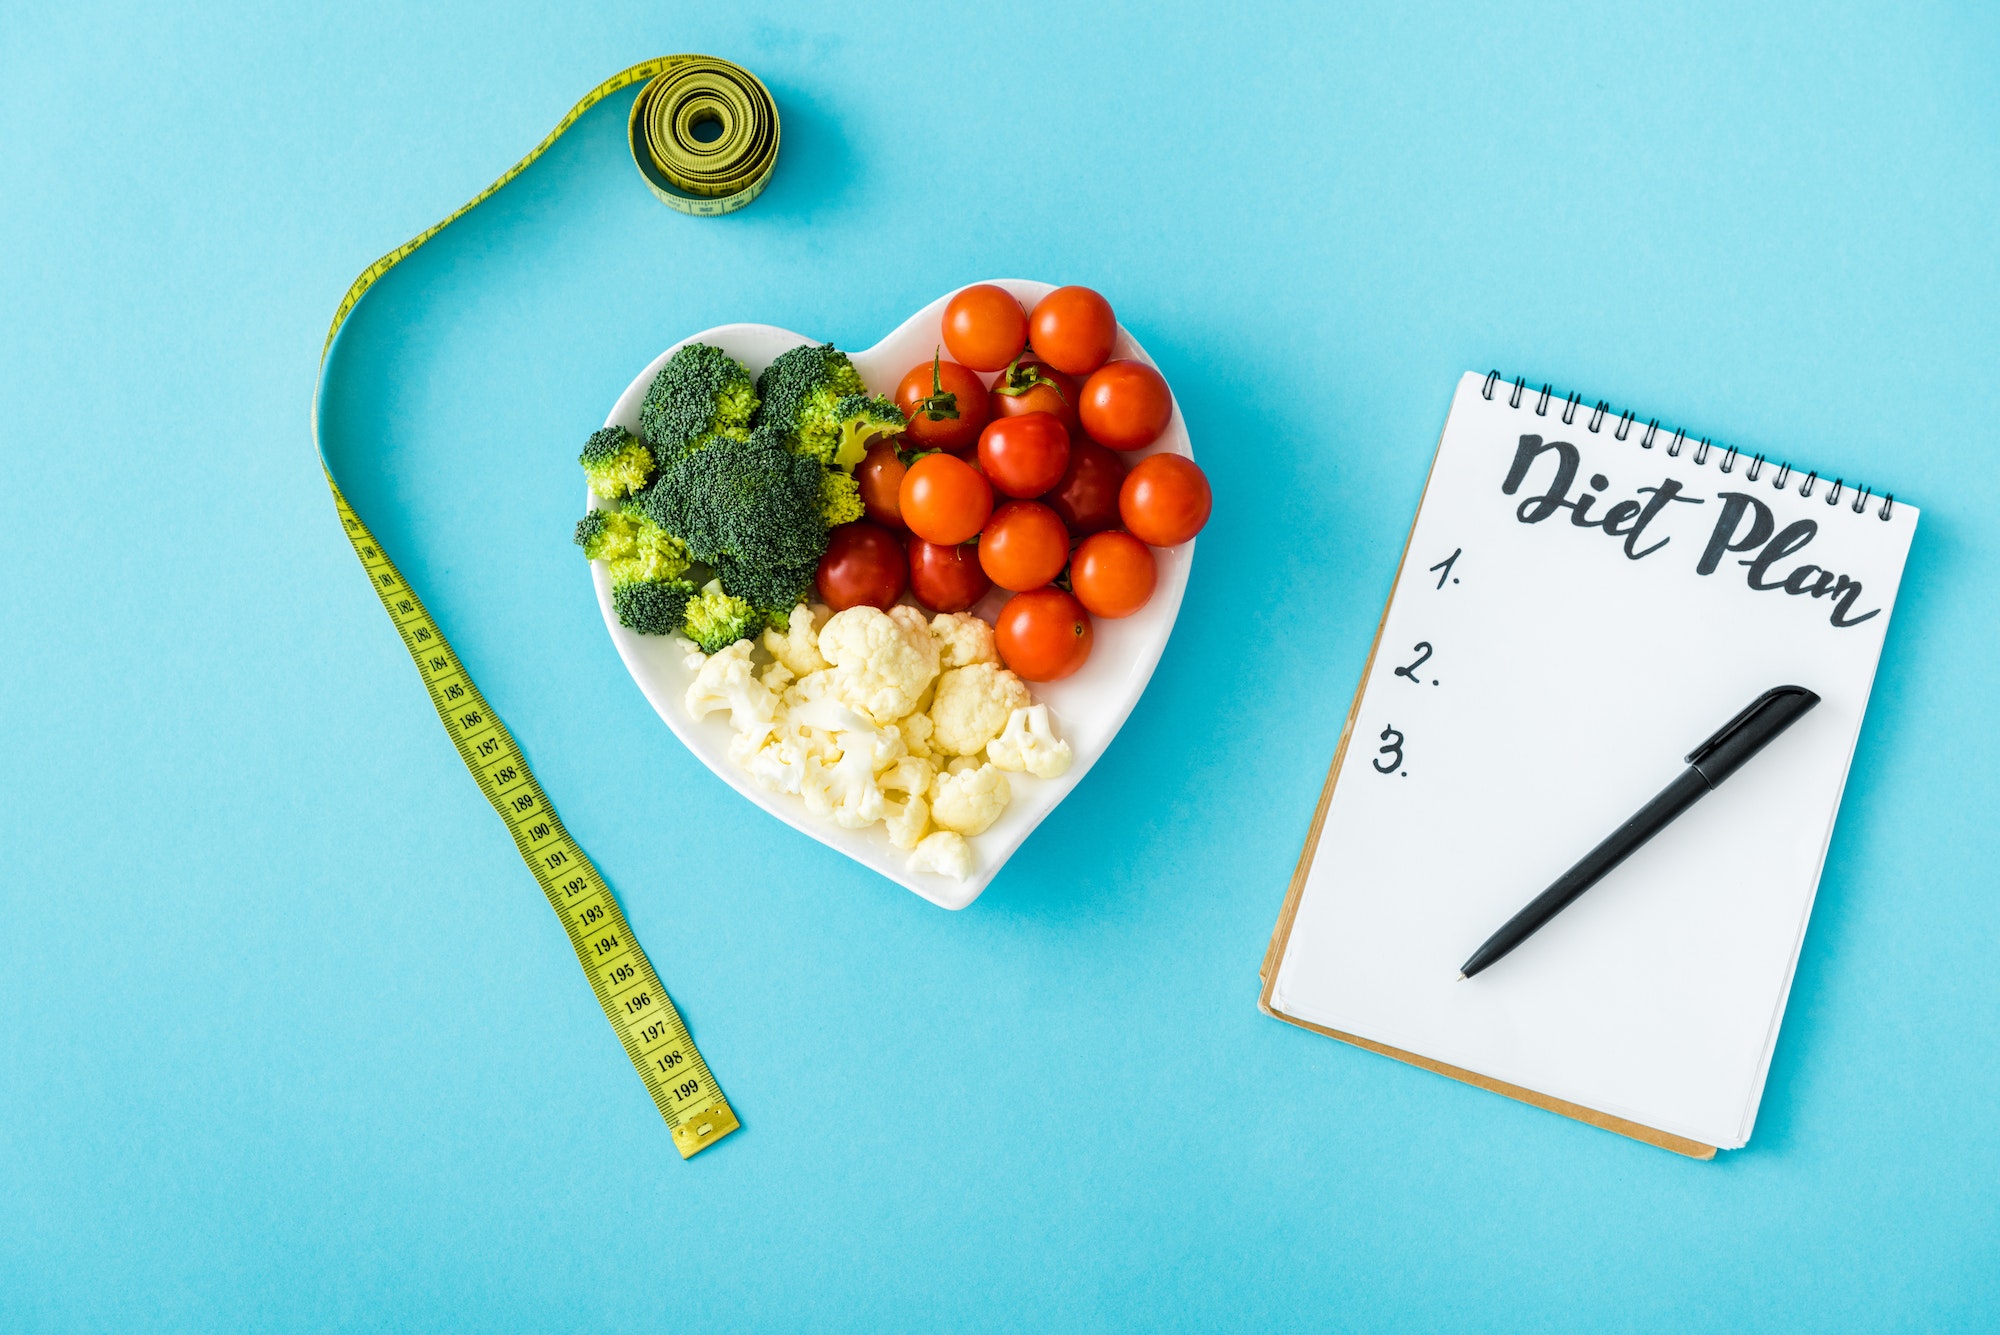 how good is the gm diet plan